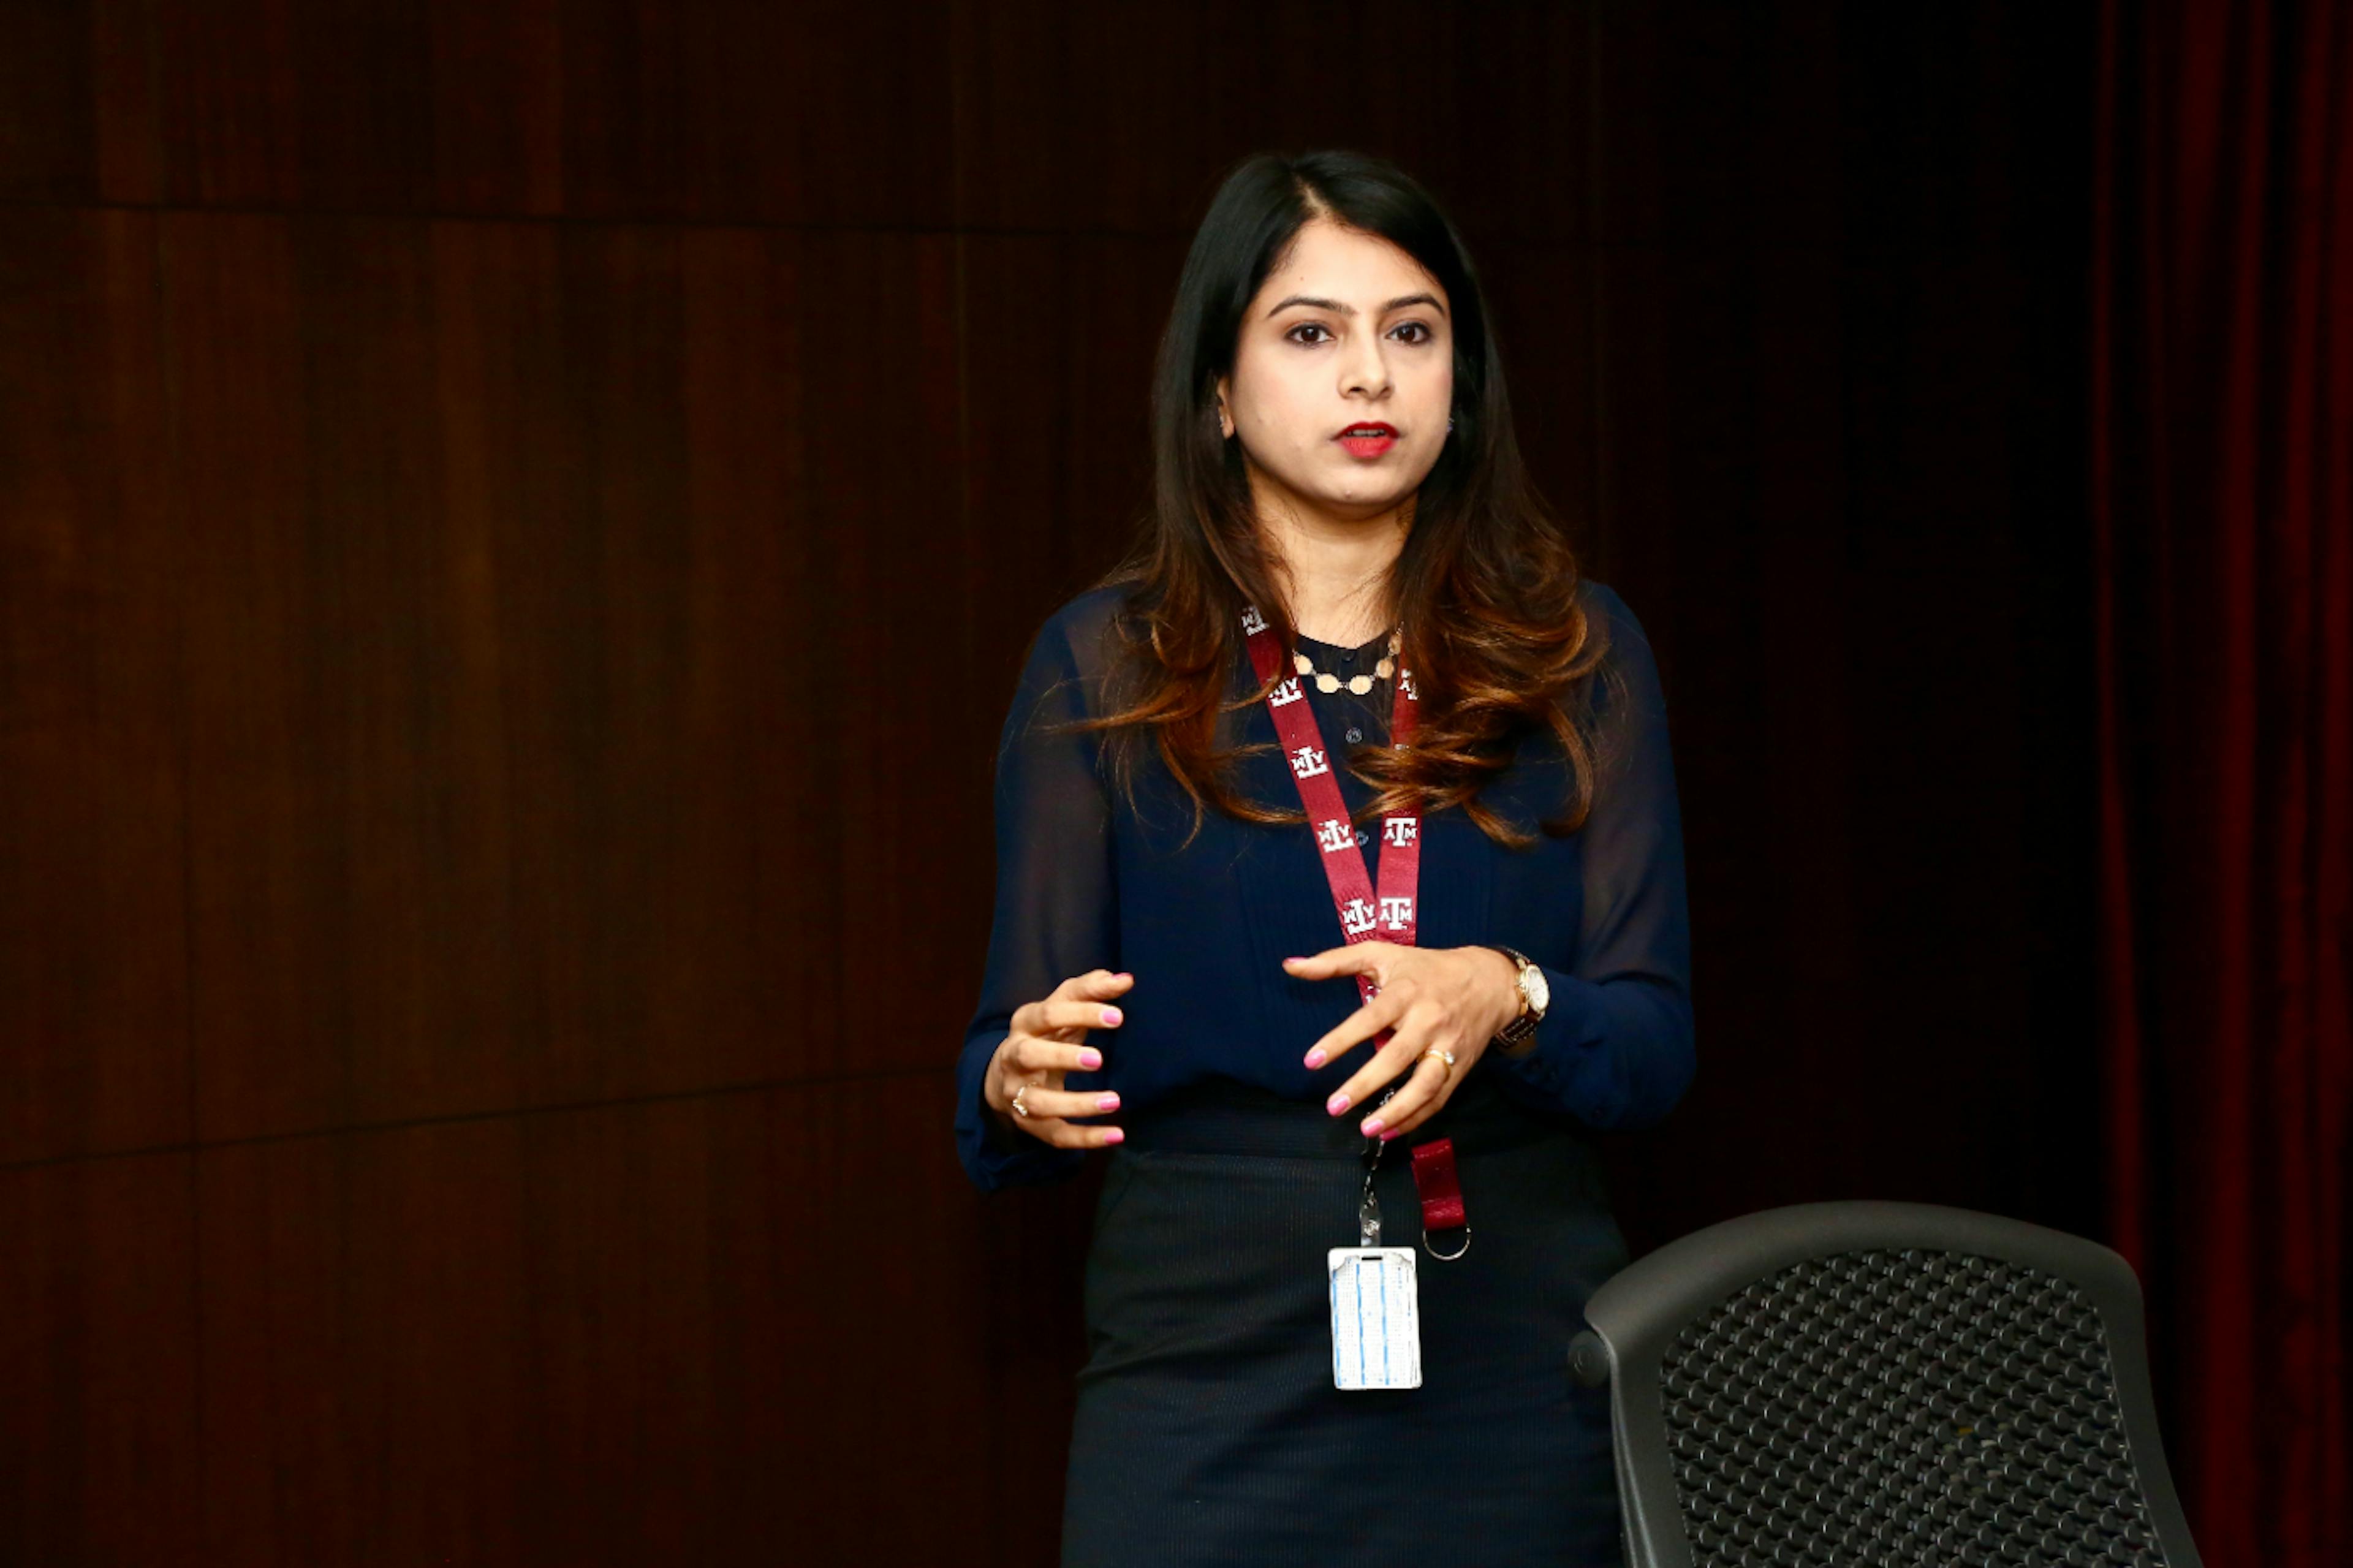 featured image - World of Technology Product Management: Women in Tech Interview with Ritika Saini